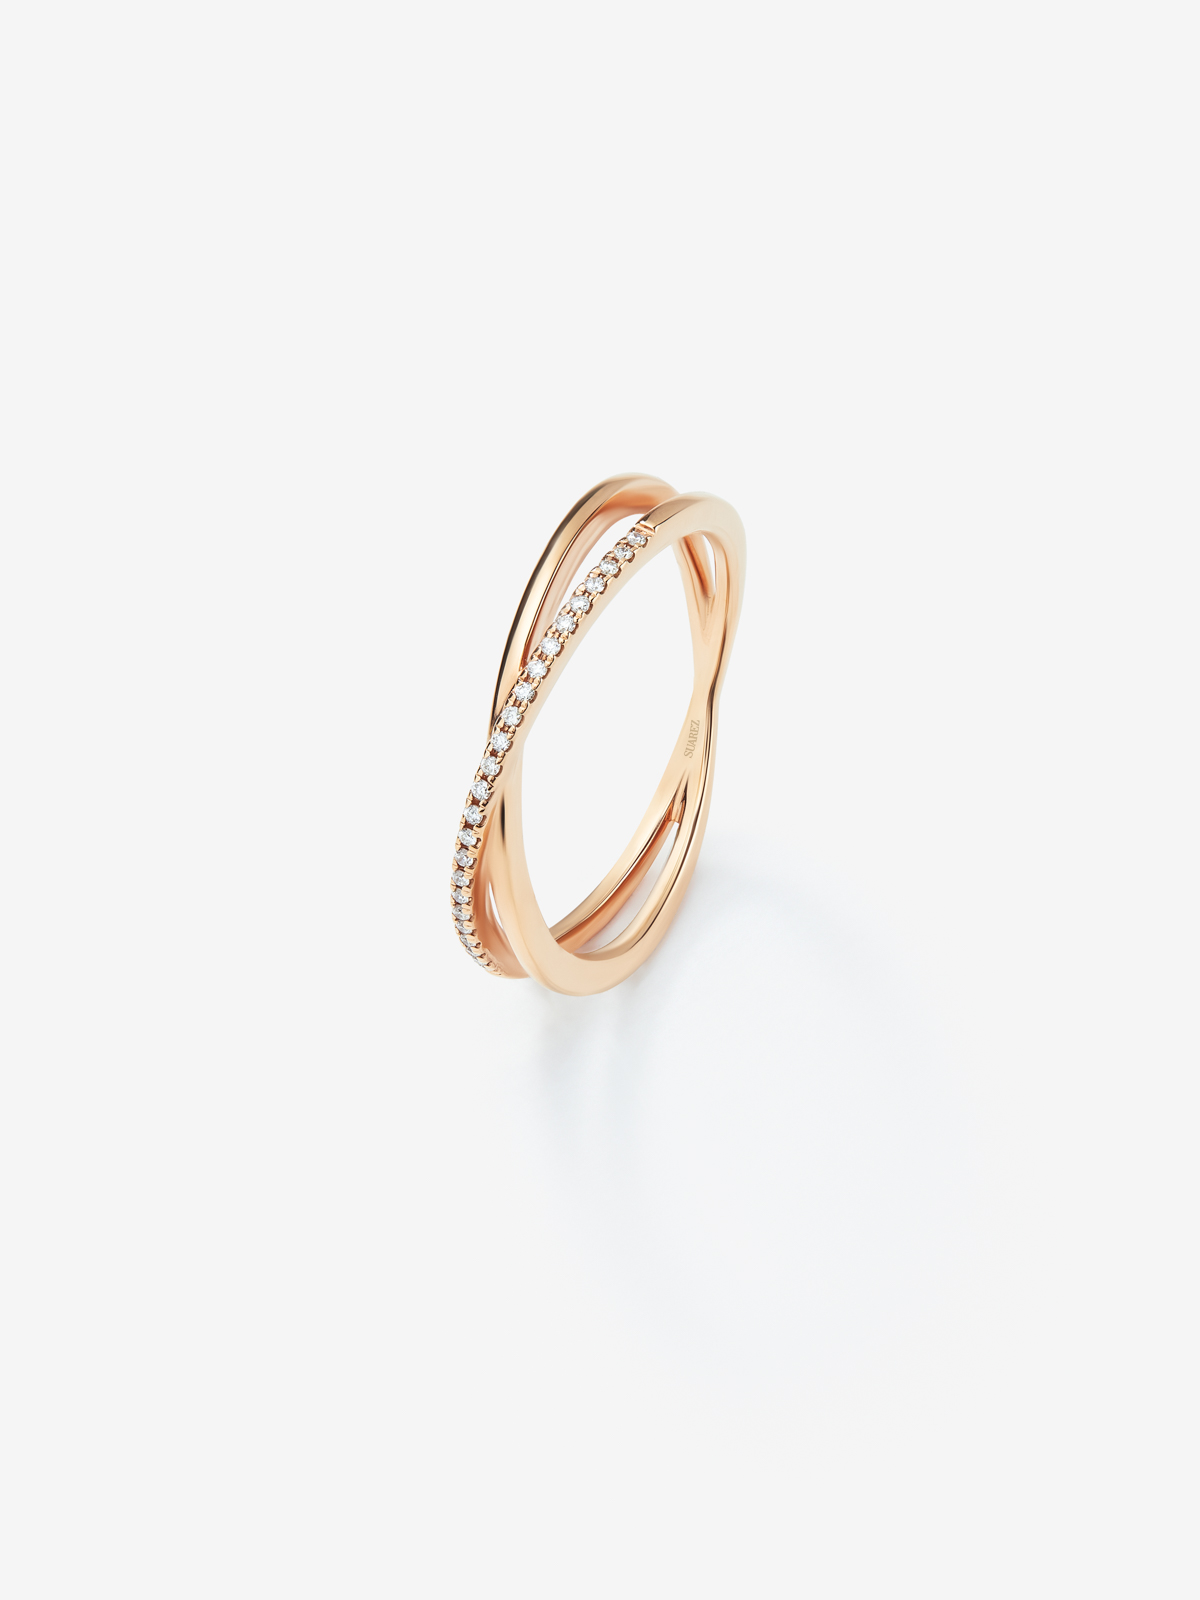 18K Rose Gold Crossed Ring with Diamonds